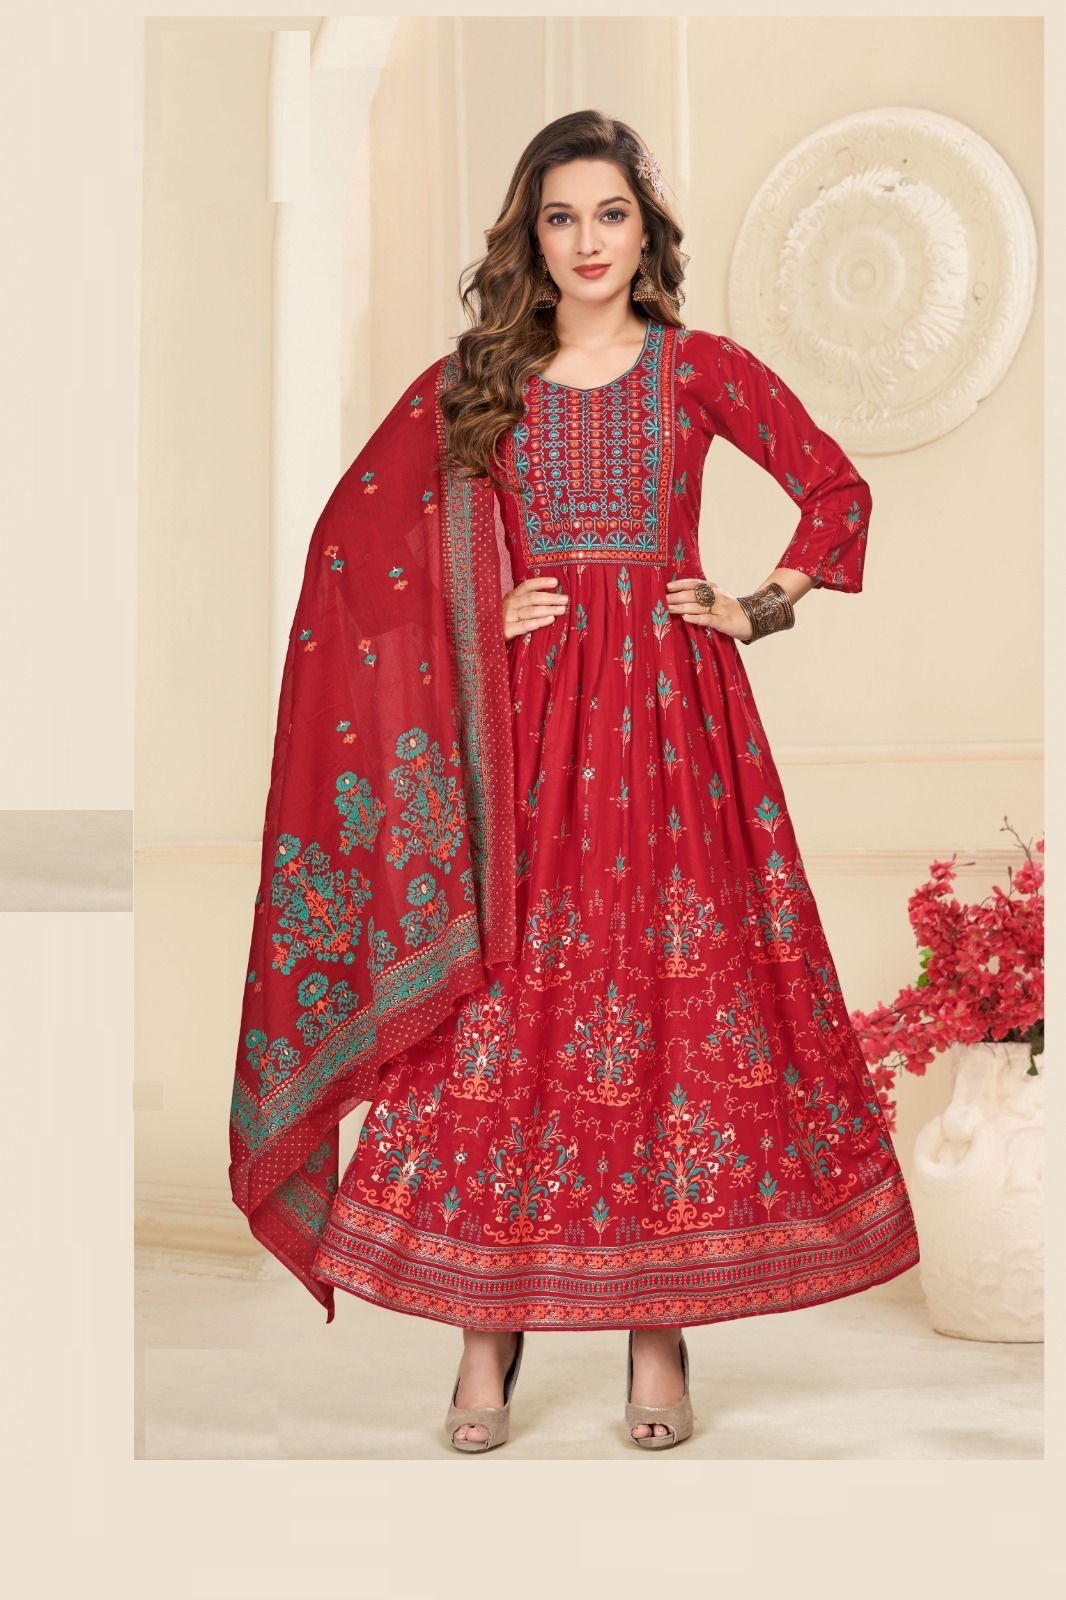 New launching Heavy Rayon Foil Prints with Neck Embroidery and Dupatta set for women